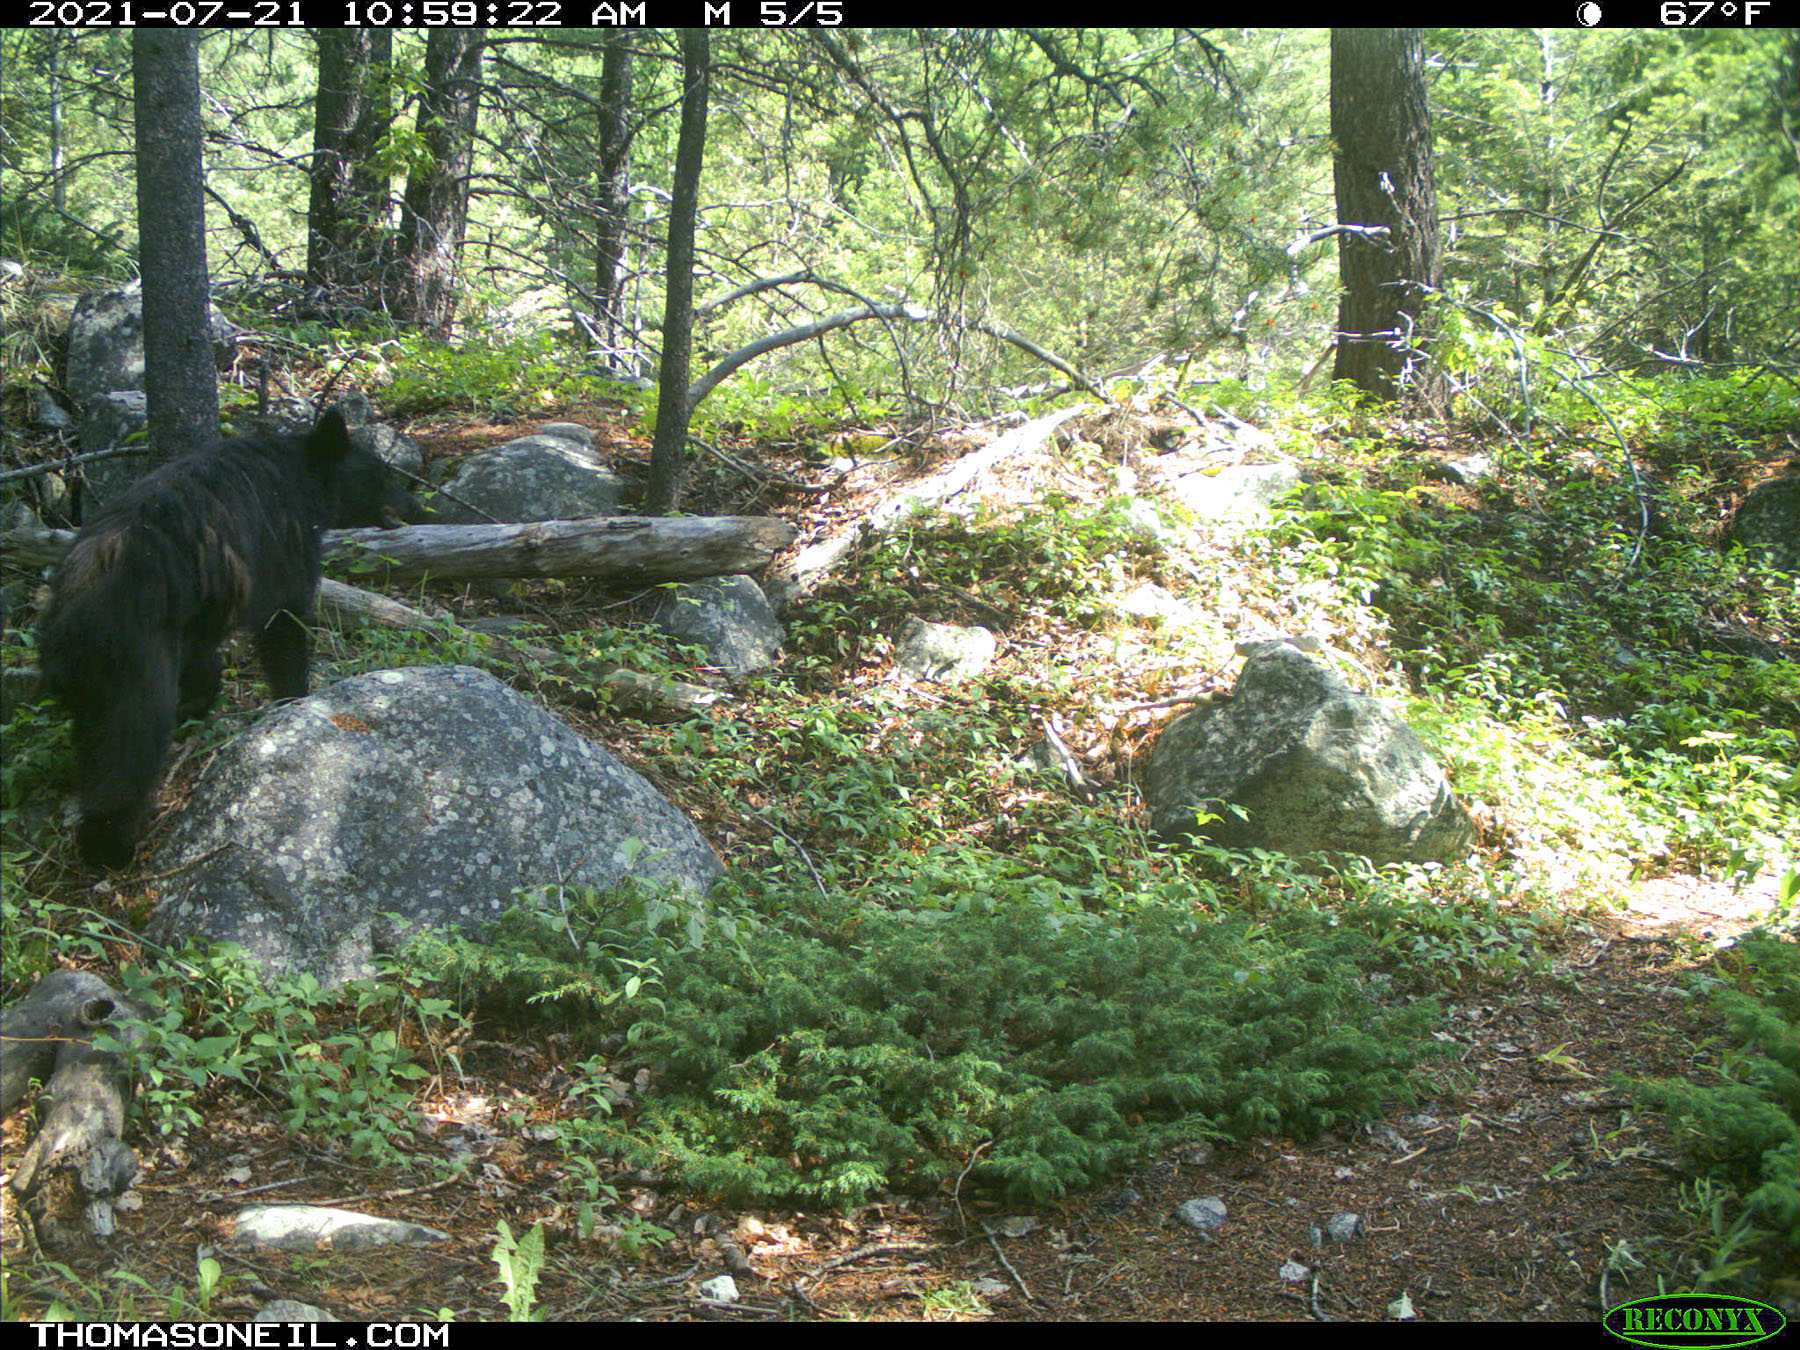 Bear on trailcam near Red Lodge, MT, October 2021.  Click for next photo.